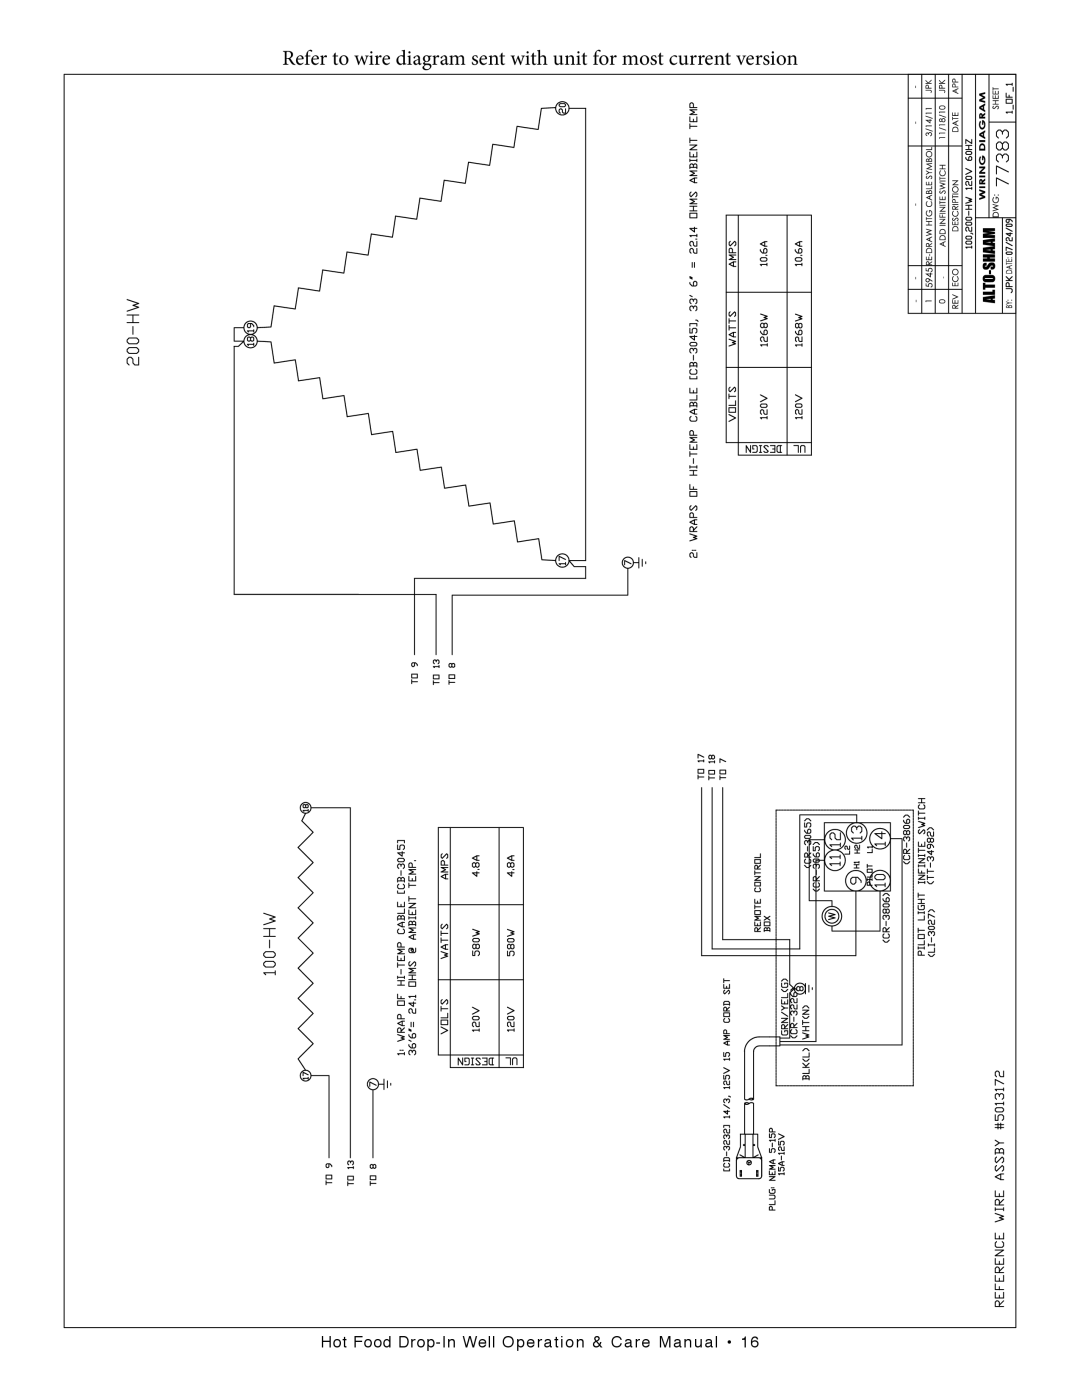 Alto-Shaam 100-HW/D443, 400-HW/D4, 400-HW/D6, 300-HW/D643 manual Refer to wire diagram sent with unit for most current version 